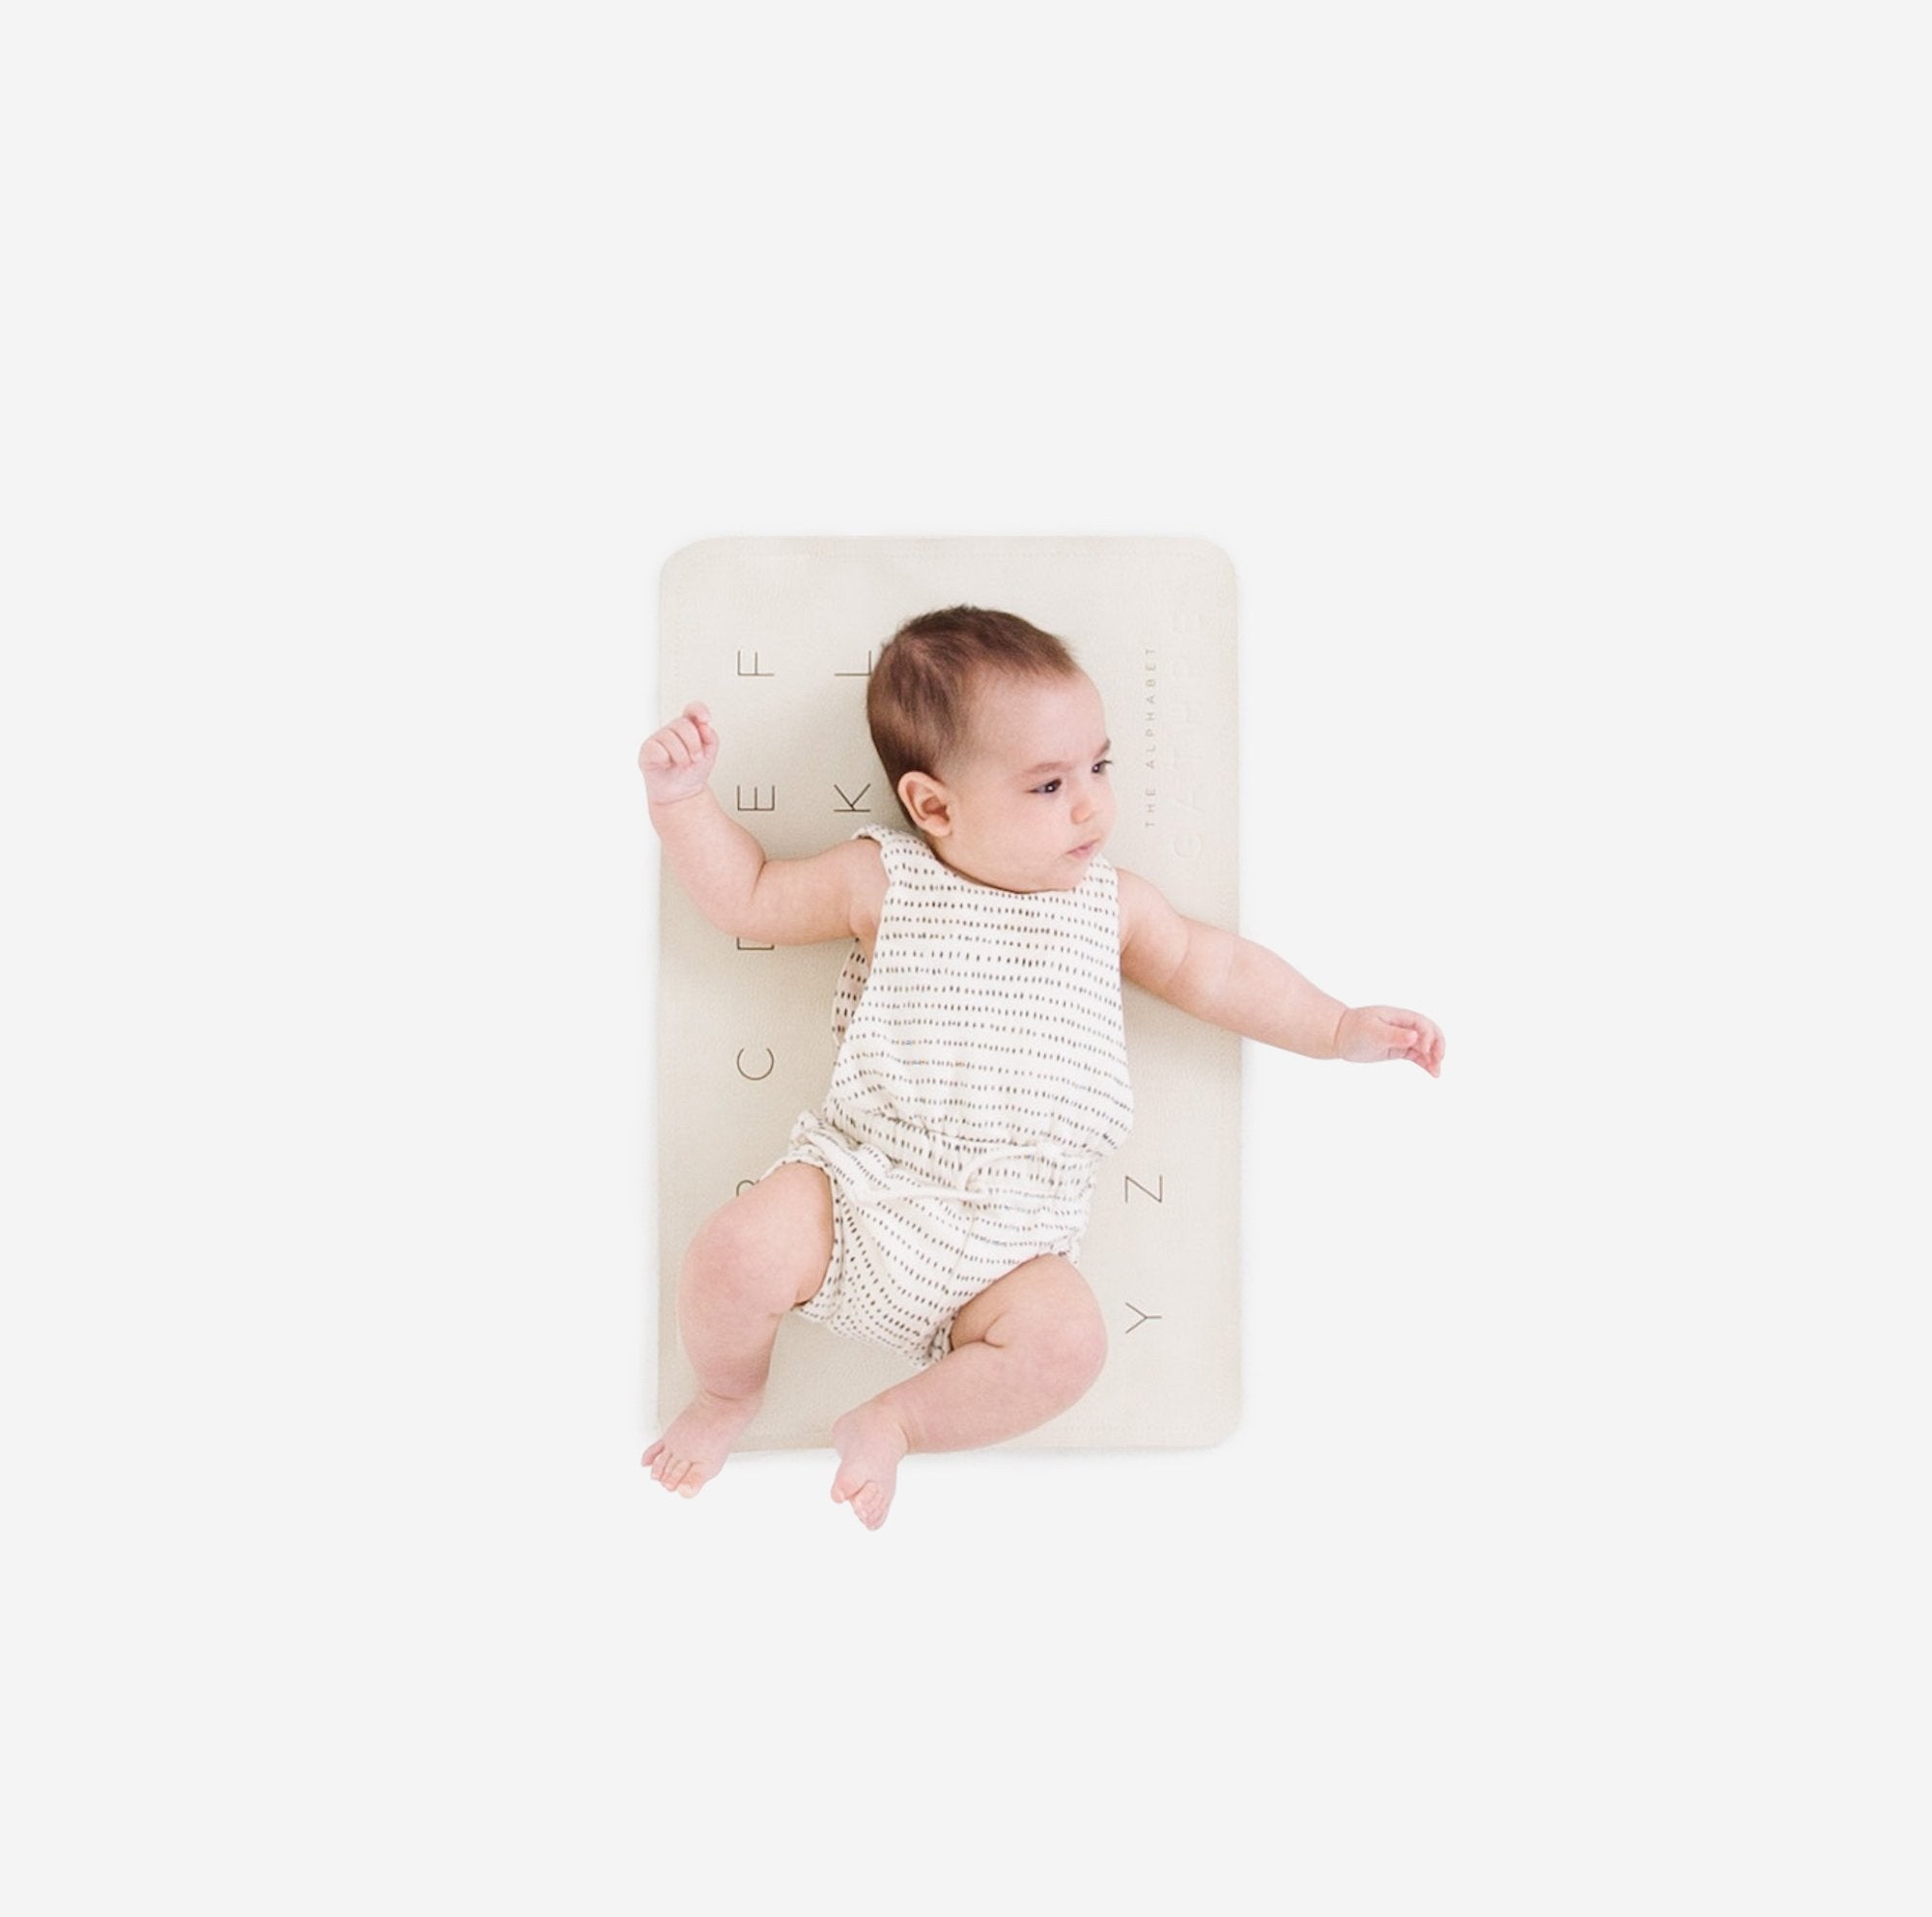 ABC@Overhead baby sitting on the ABC Micro mat